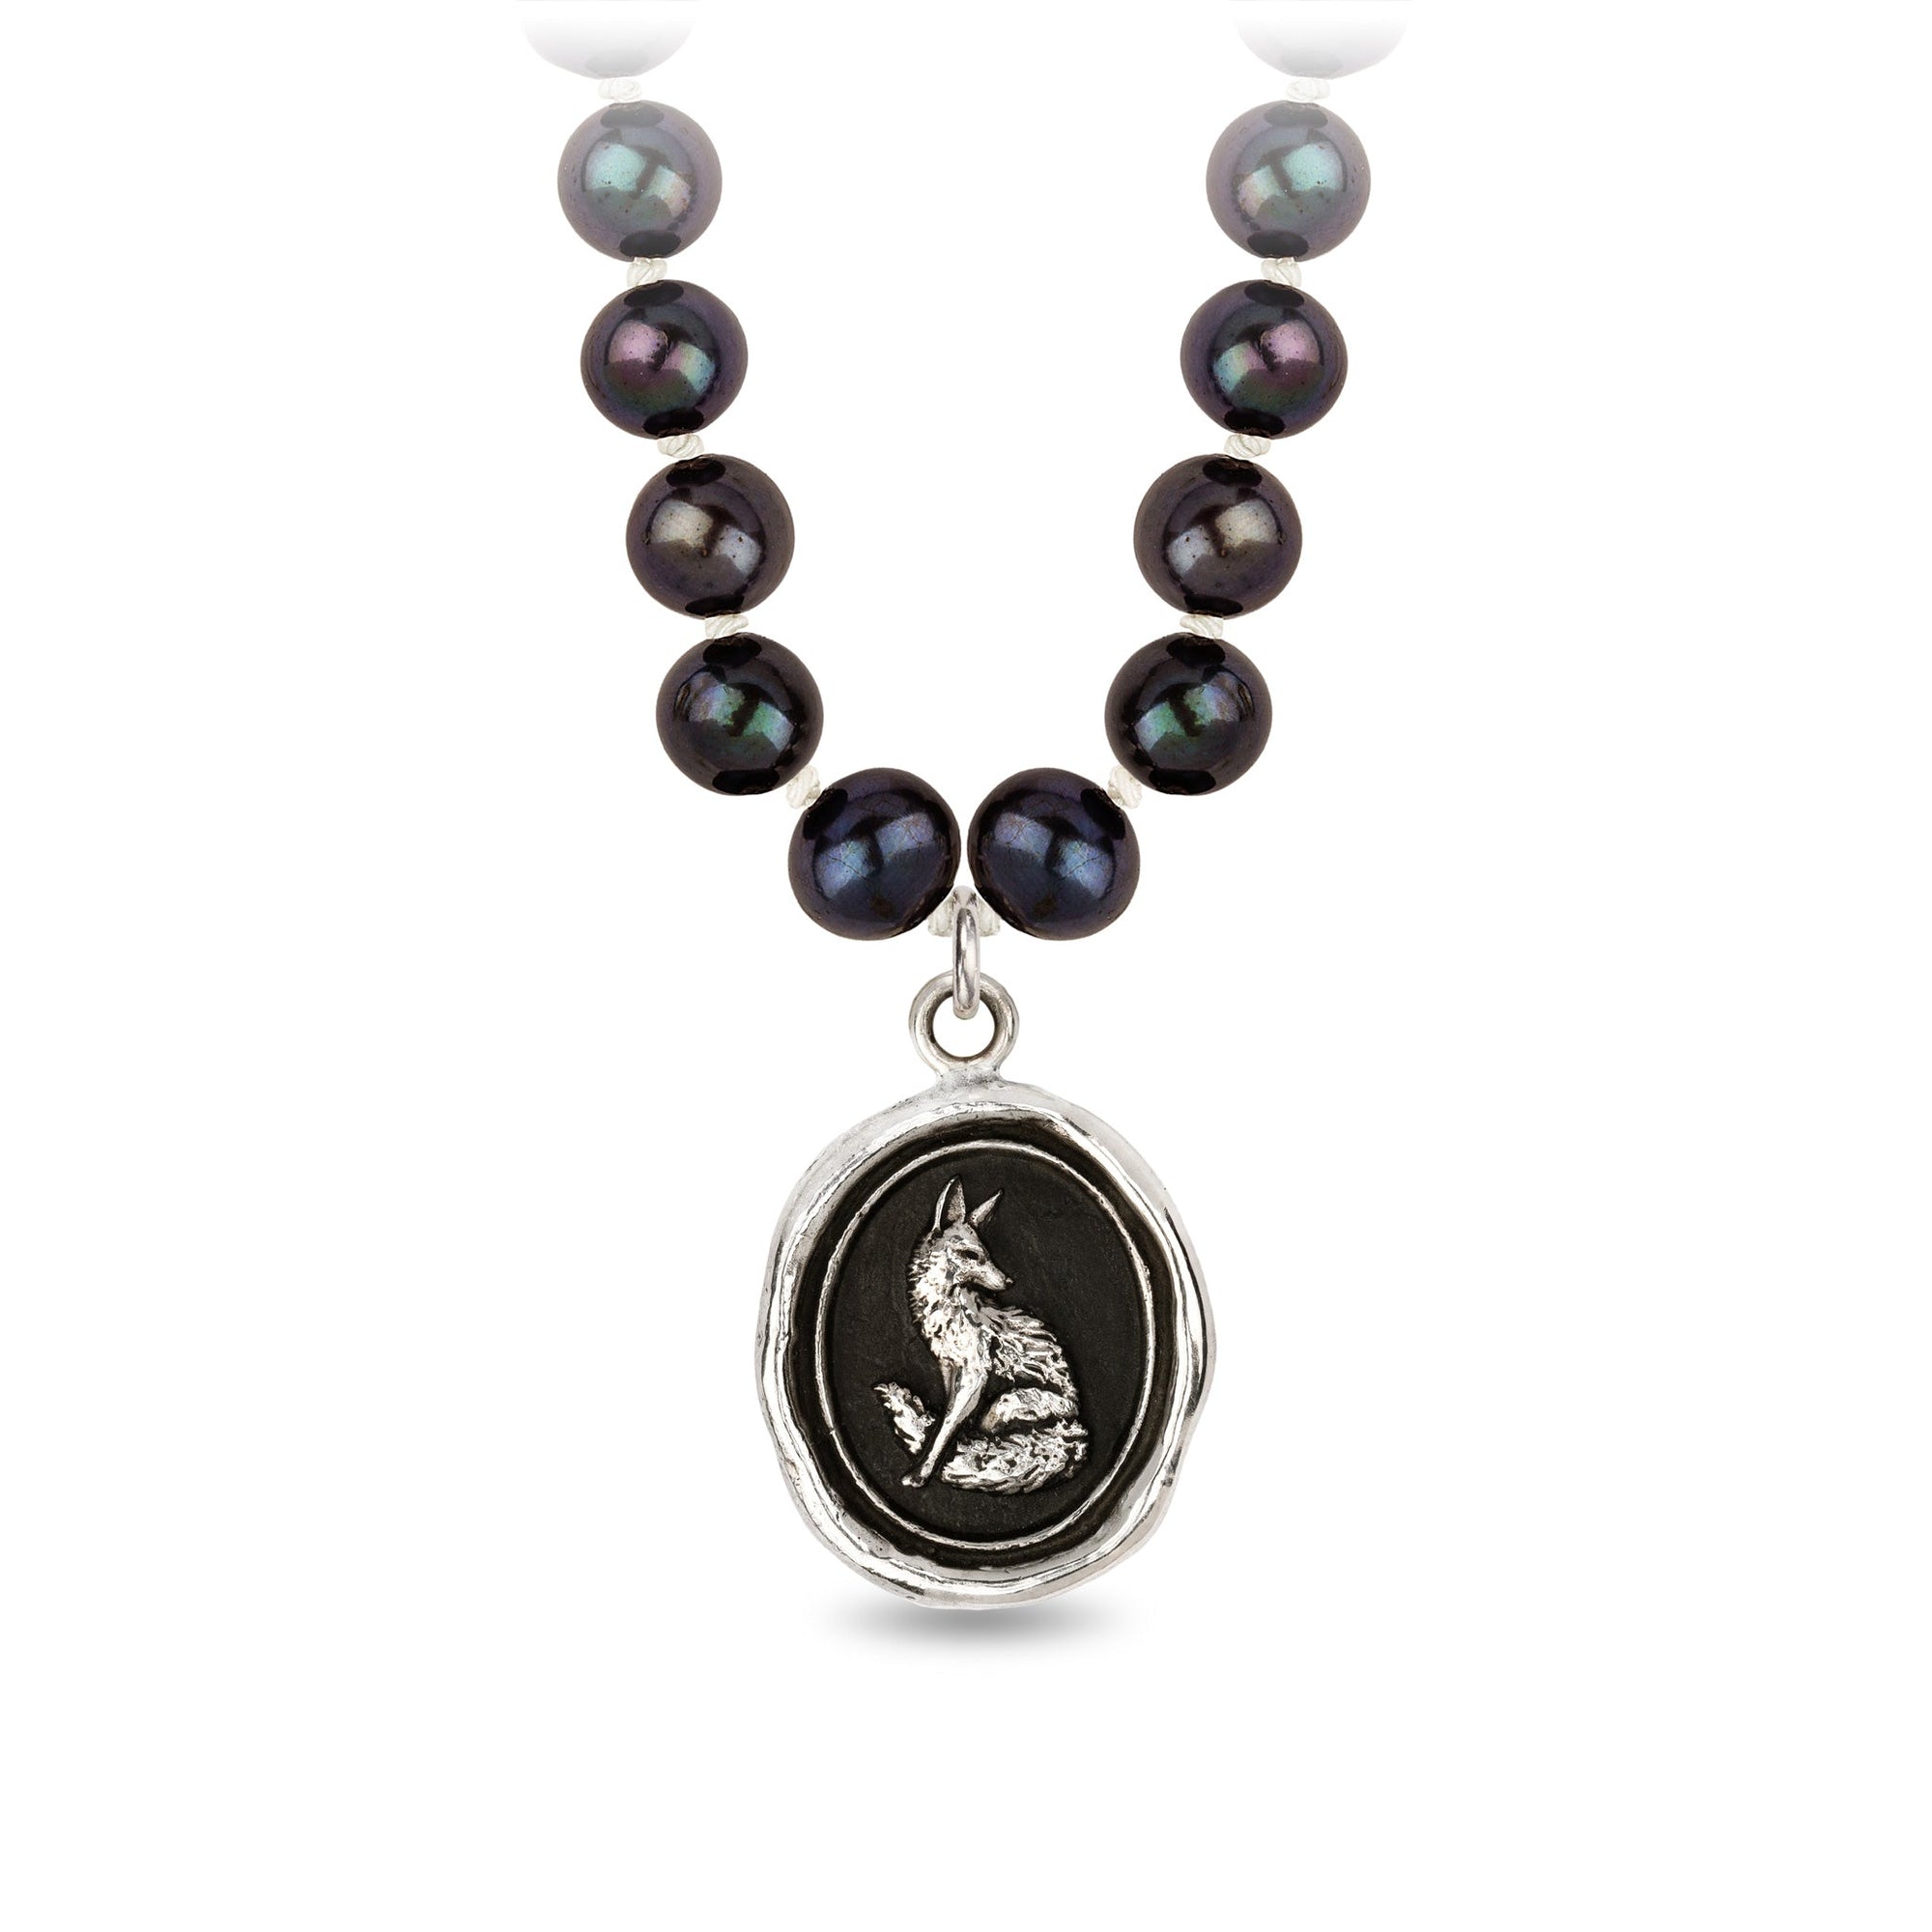 Trust in Yourself Freshwater Pearl Necklace - Peacock Black